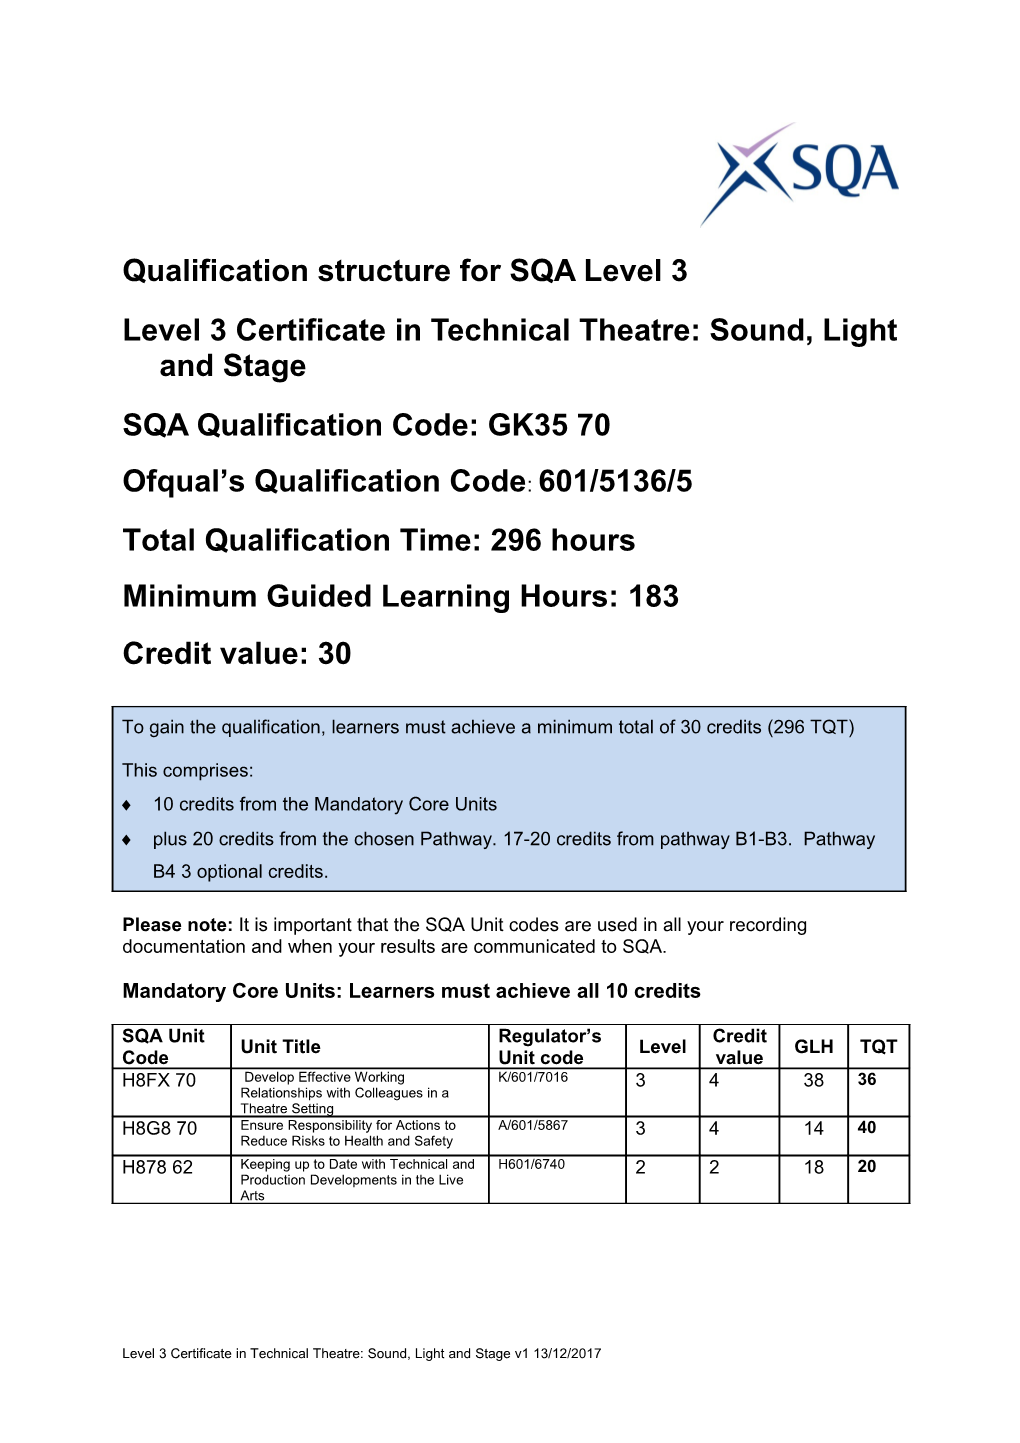 Qualification Structure for SQA Level 3